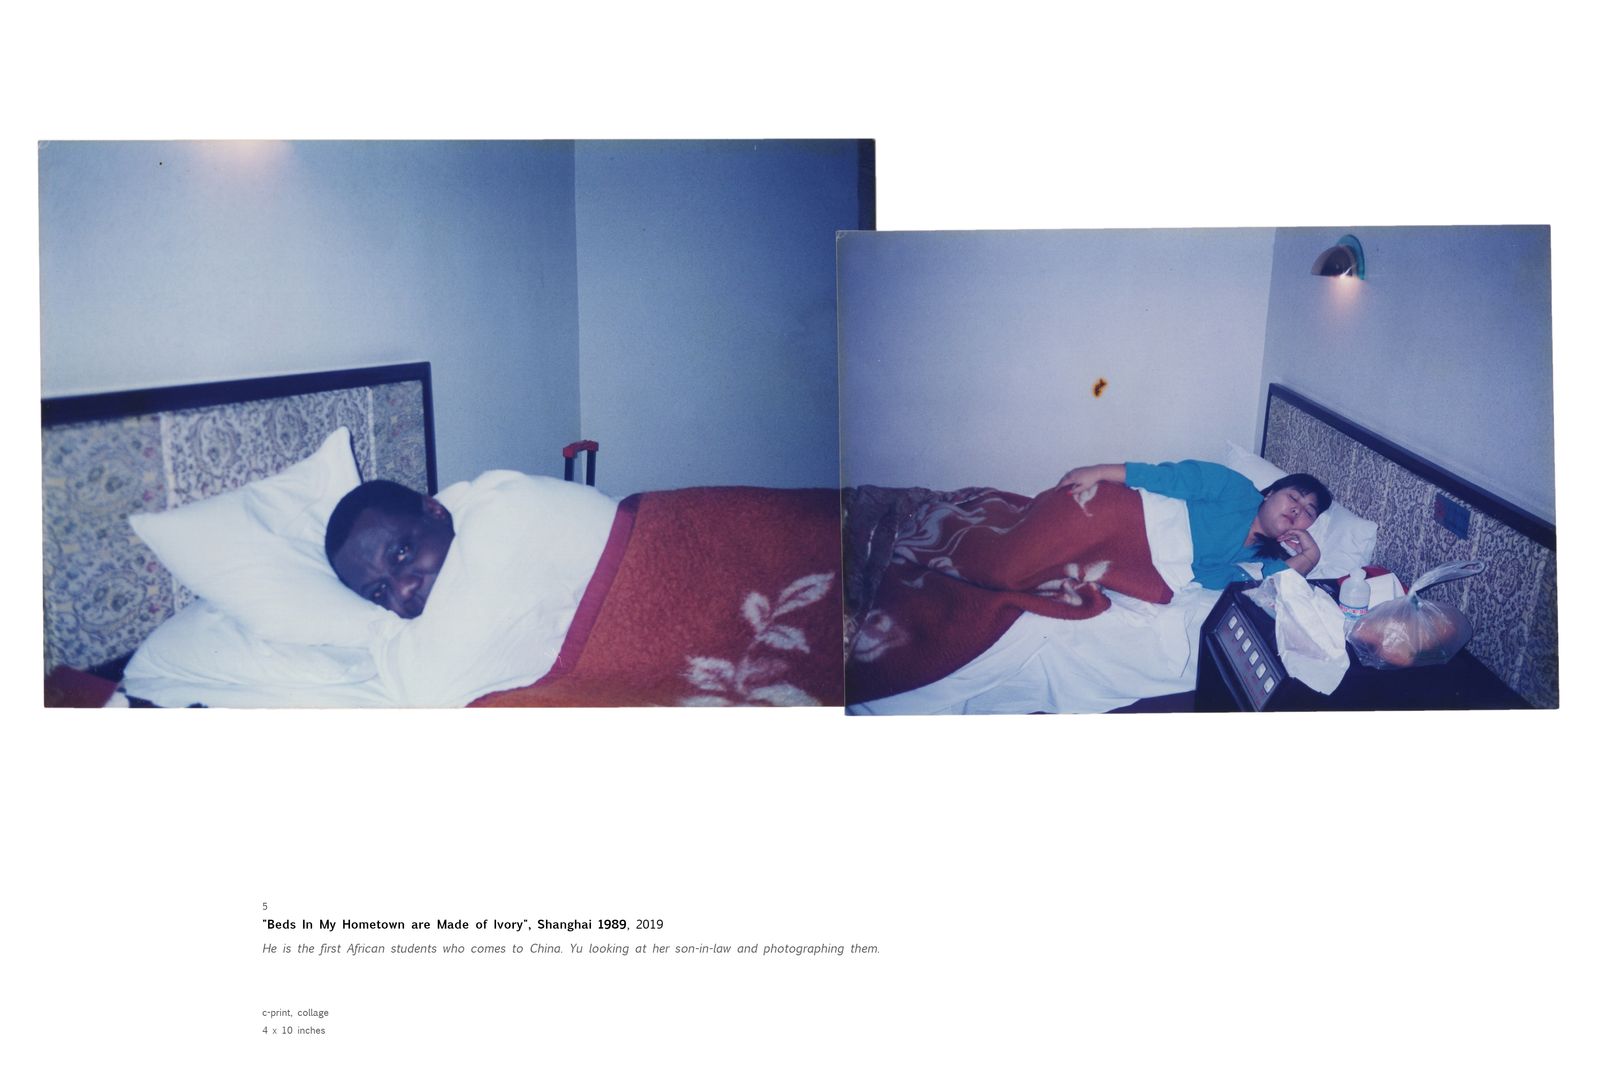 © Senjie Zhu - "Beds In My Hometown are Made of Ivory", Shanghai 1989, 2019